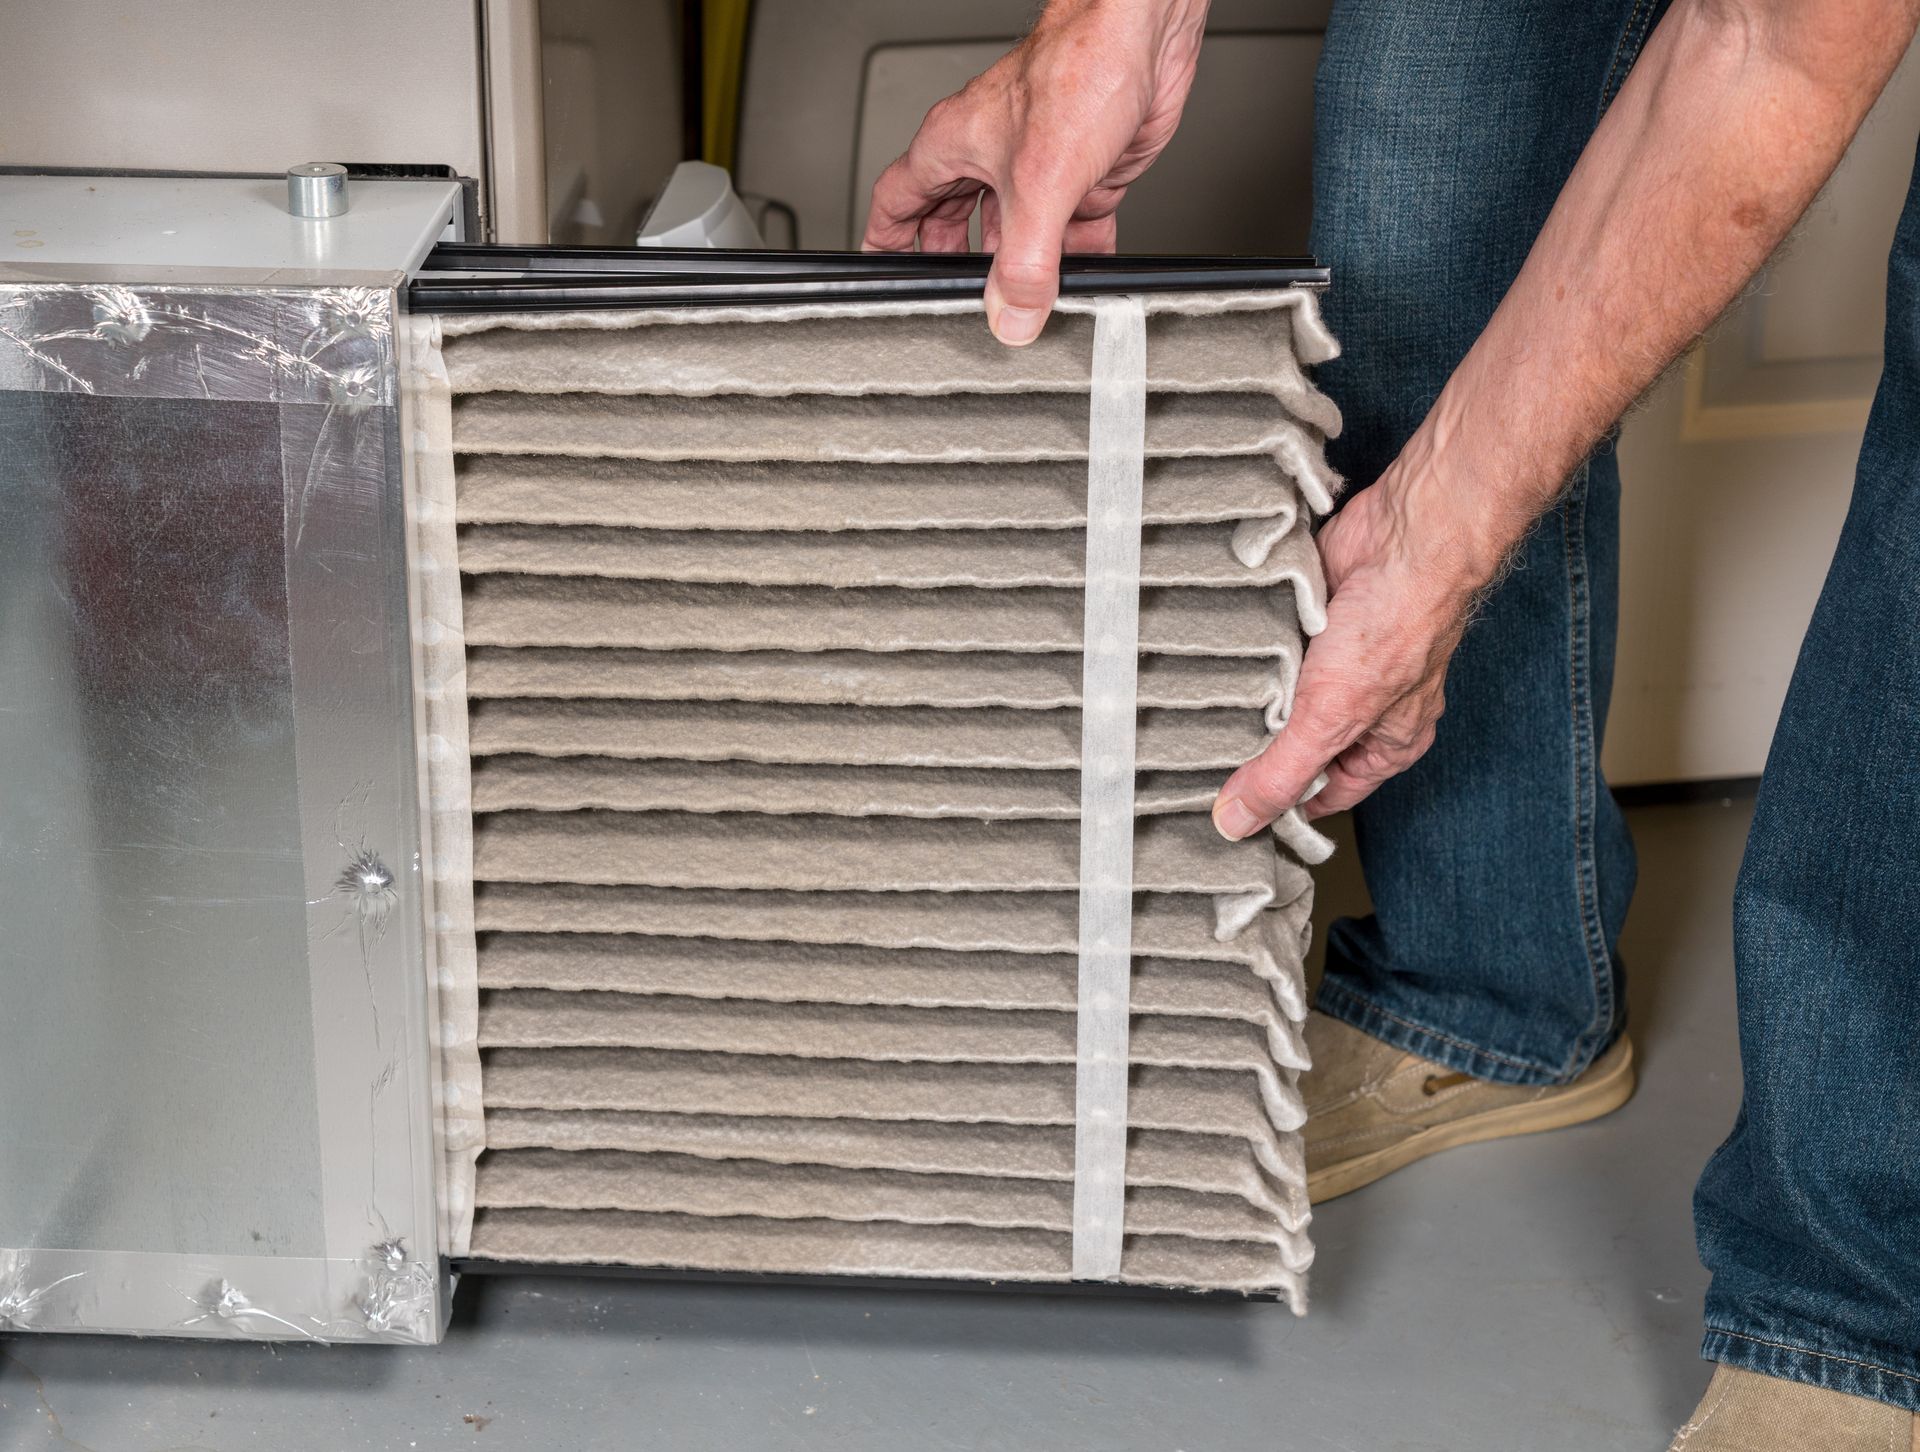 A person's hands holding a dirty air filter, preparing to replace it in an HVAC furnace.